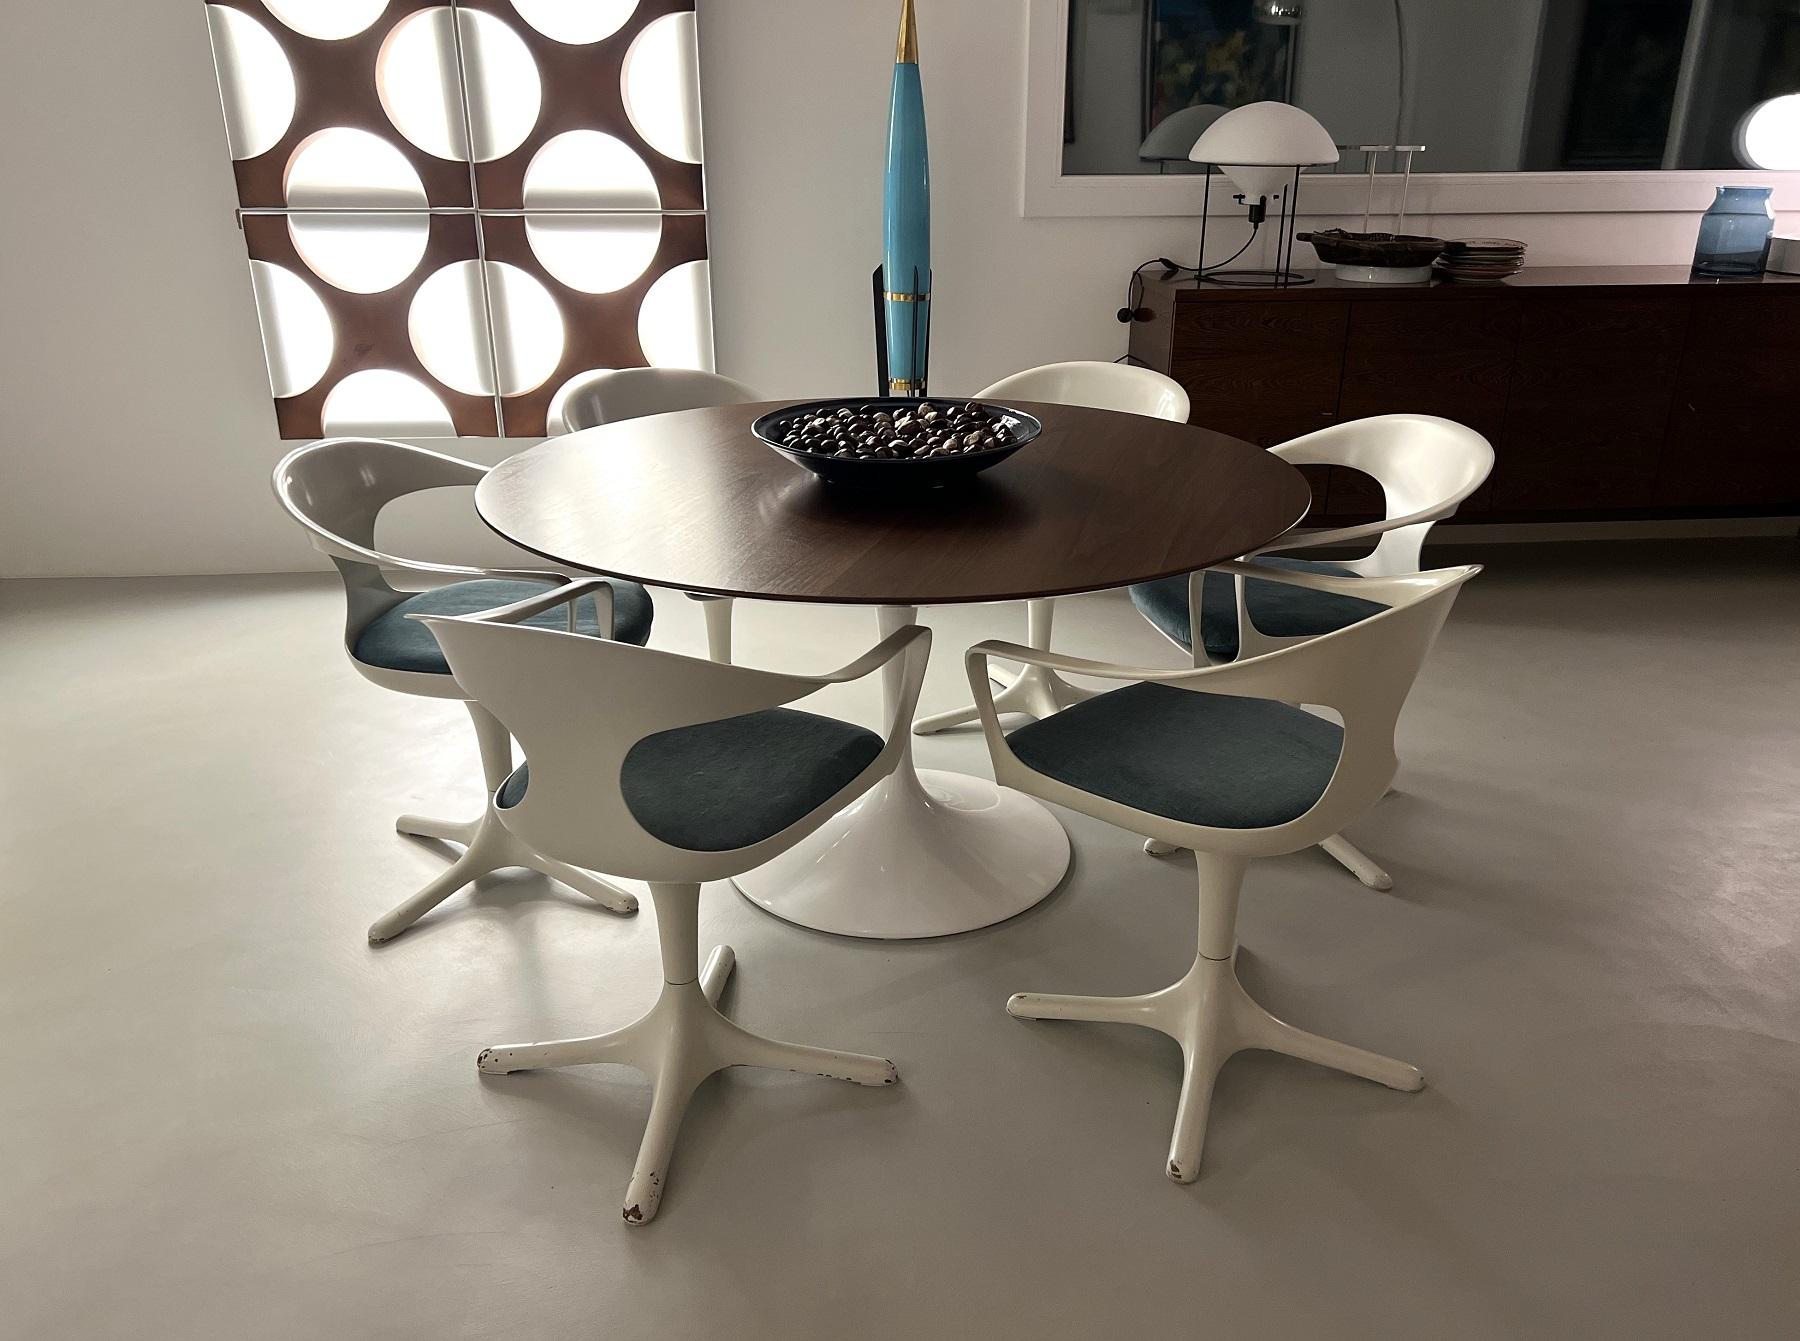 Gorgeous set of 6 dining room chairs from the space age era.
Designed in the 1960s by Konrad Schäfer, Germany, and produced from Lübke.
The chairs turn easily in both directions.
The material is a very good plastic resin, and very stable, and the